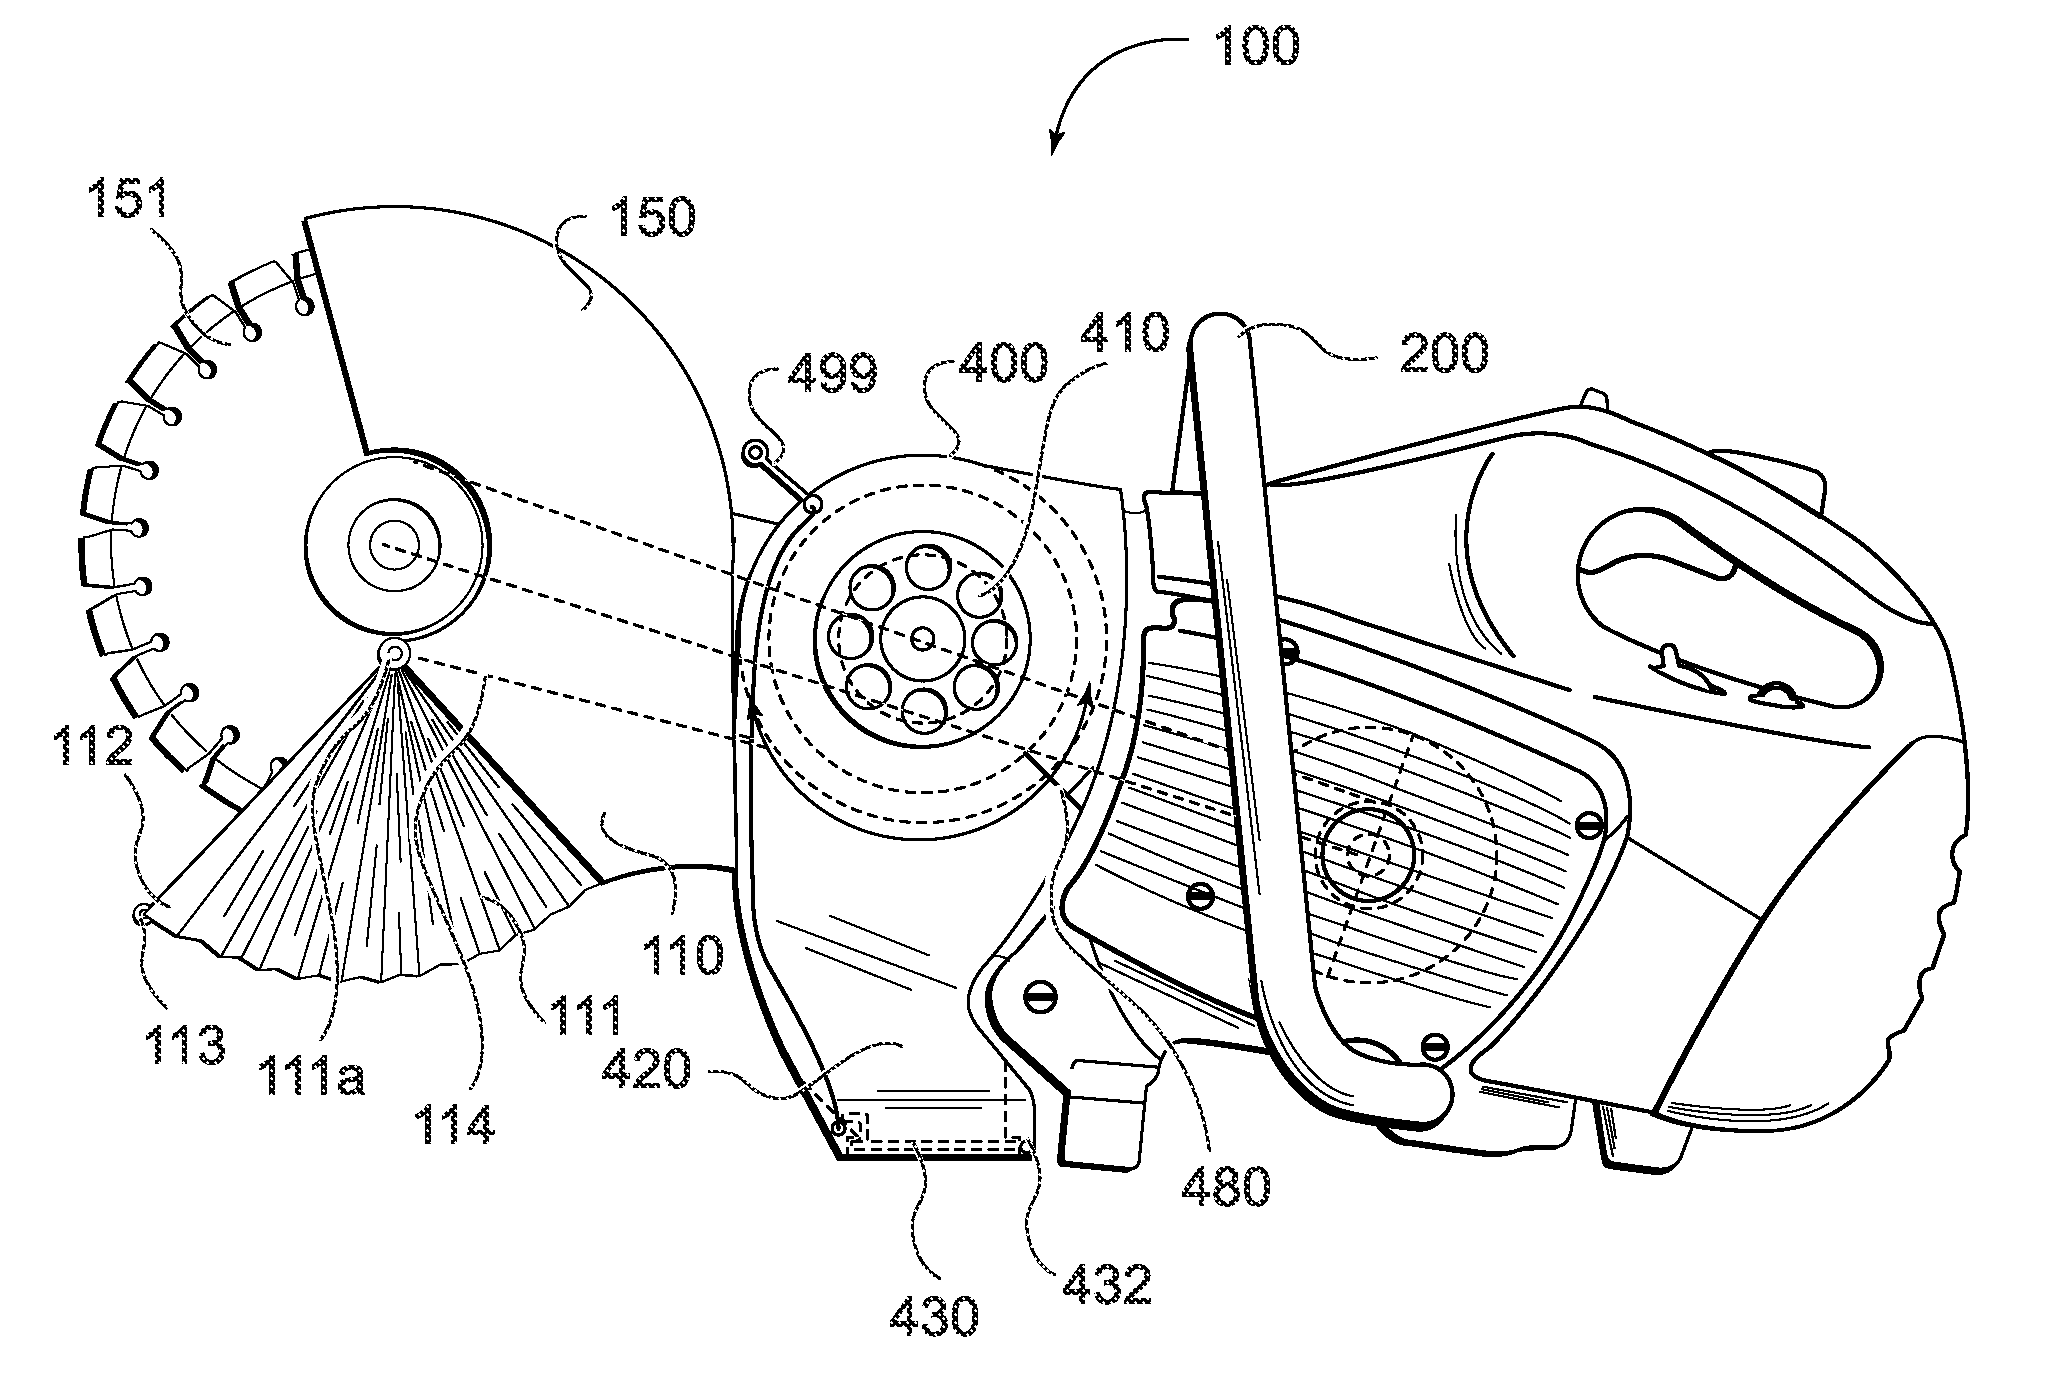 Power saw apparatus with integrated dust collector